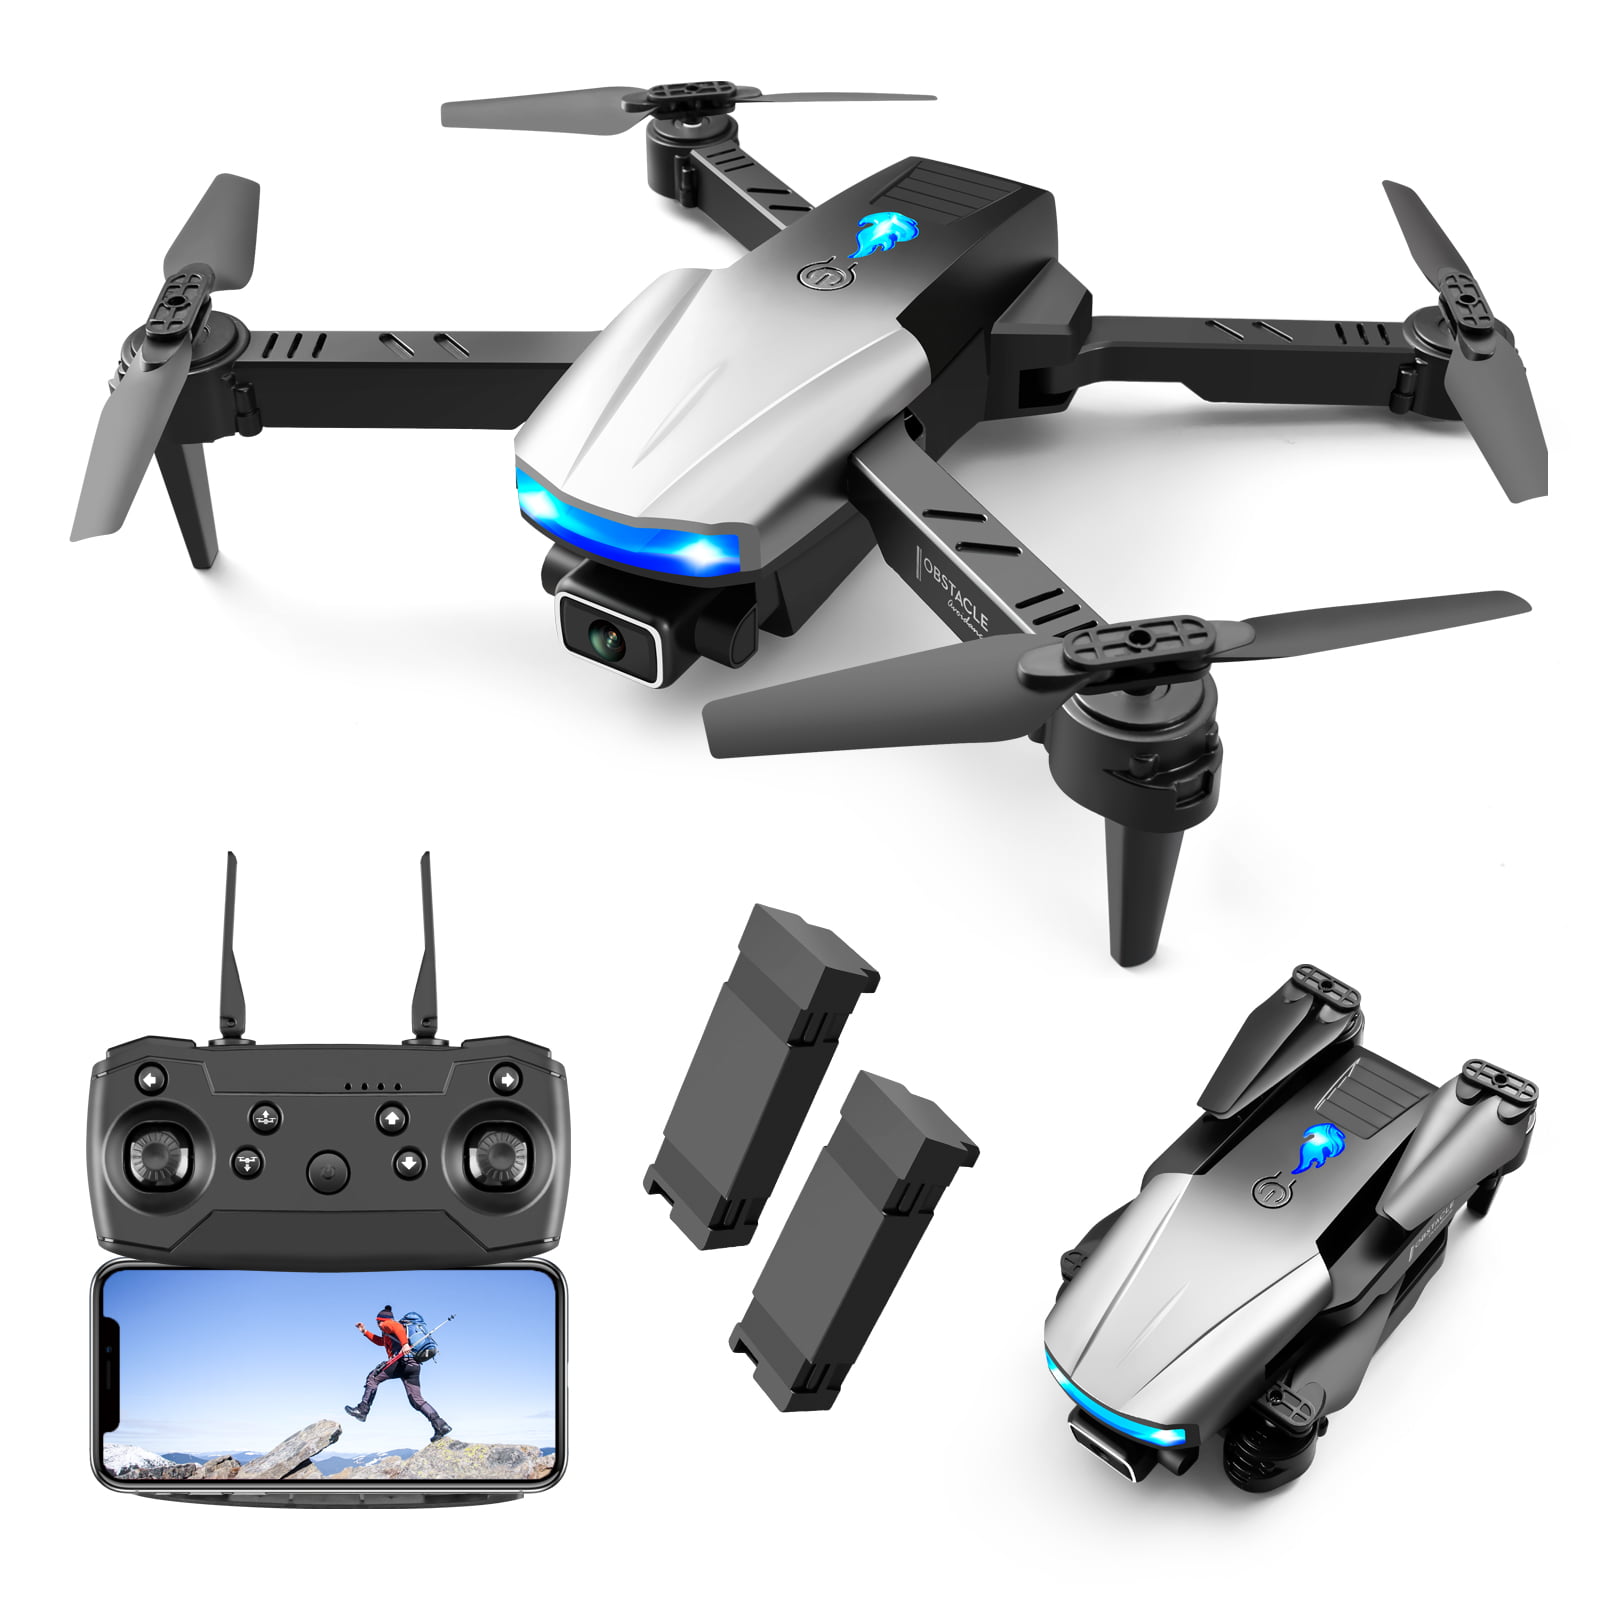 Foldable Mini RC Quadcopter Drone With 720p HD Camera Selfie 2MP WiFi FPV RC Toy 